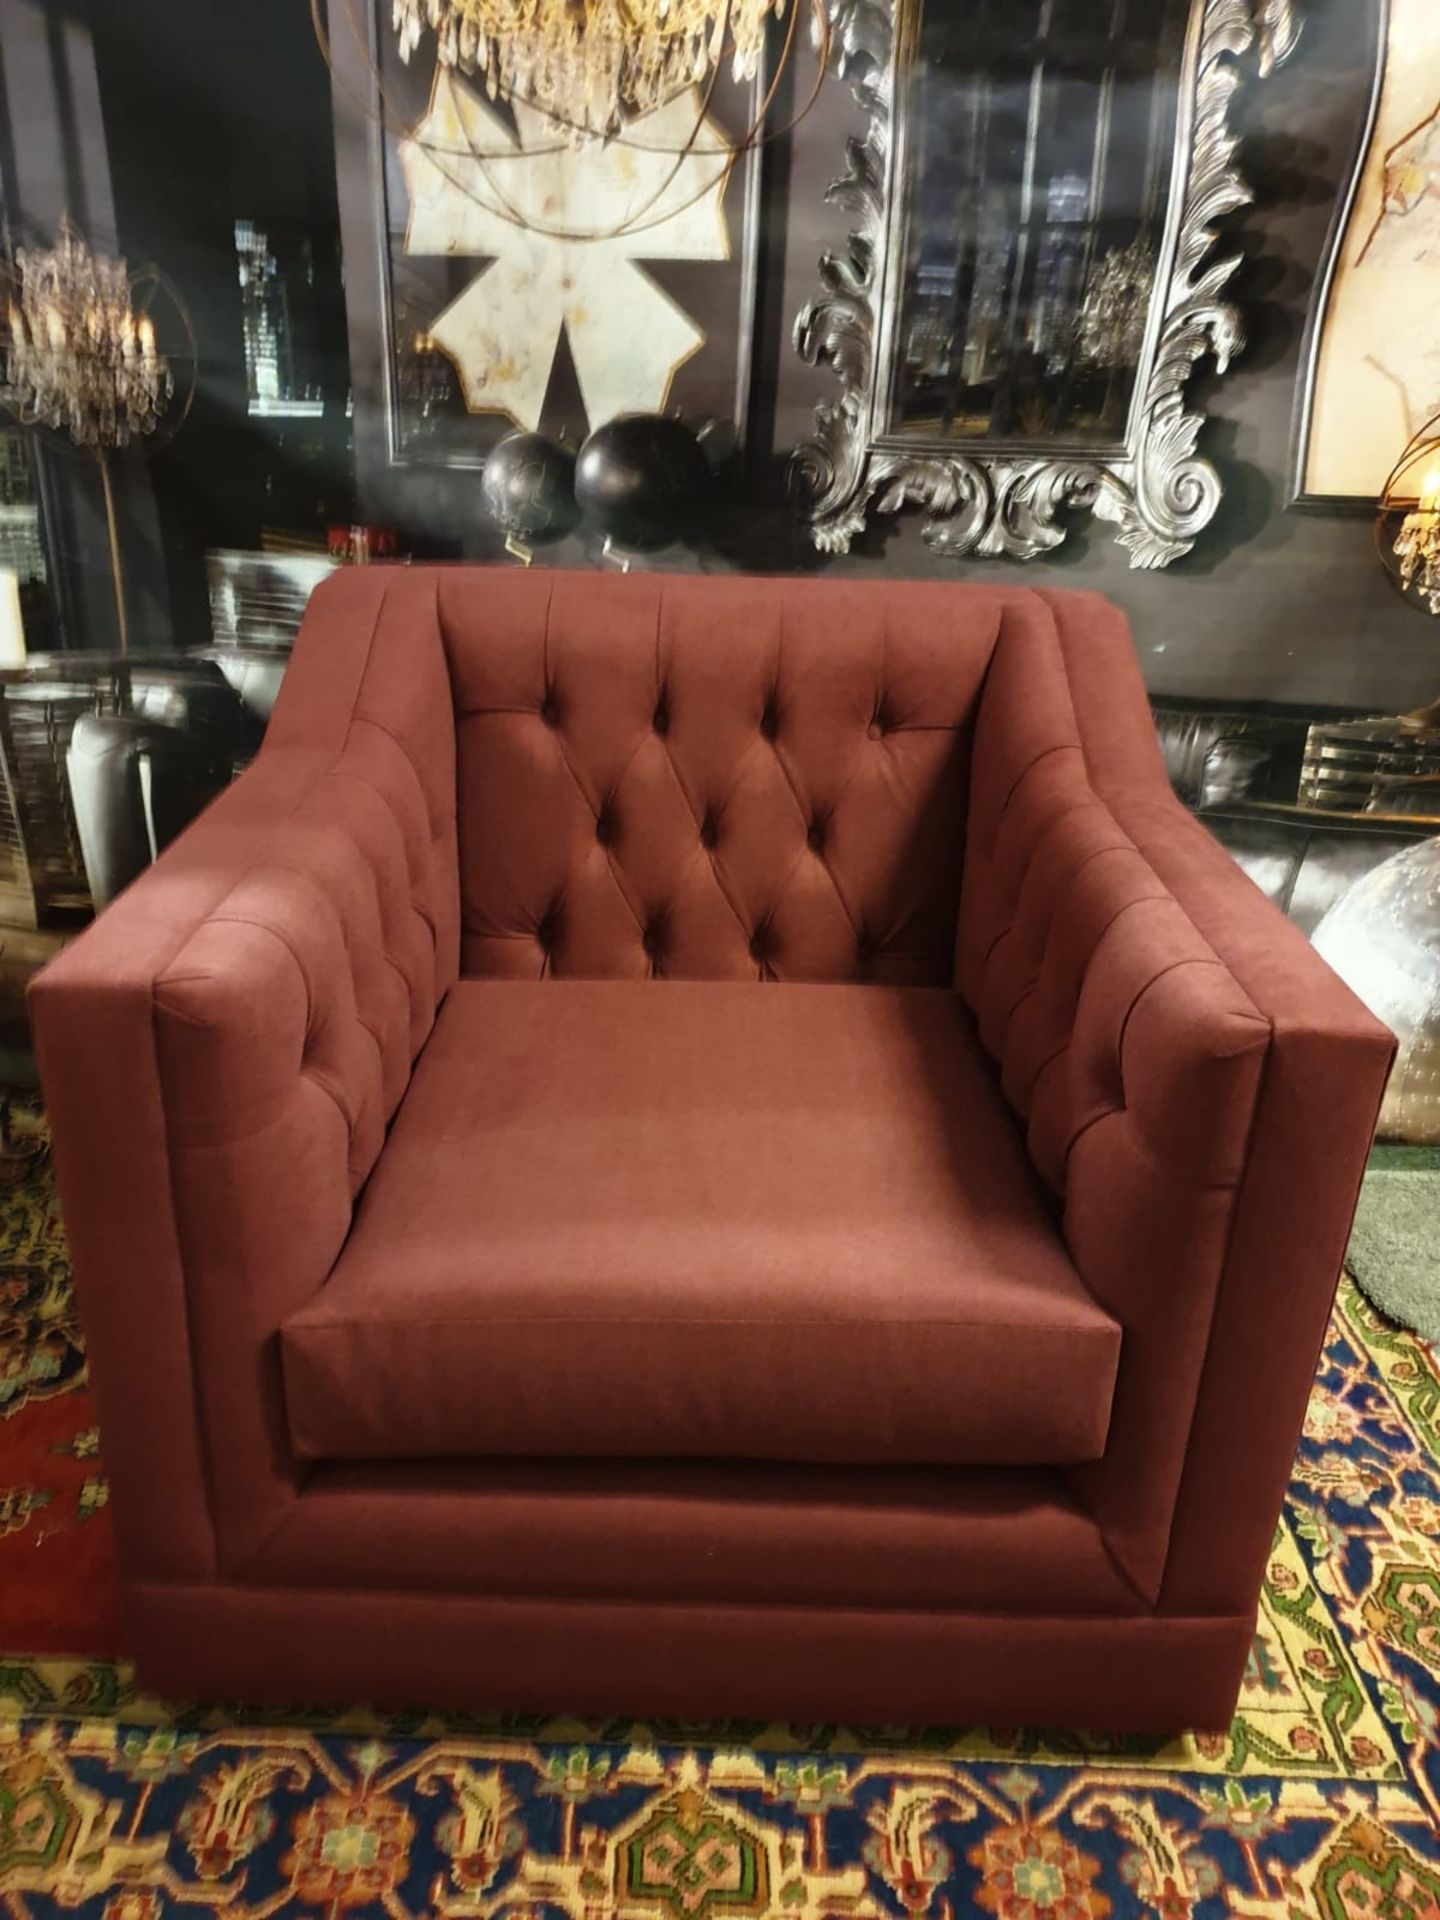 James Armchair Berwick Marsala Style Thy Name Is James. This Twist On A Chesterfield Is A Classic